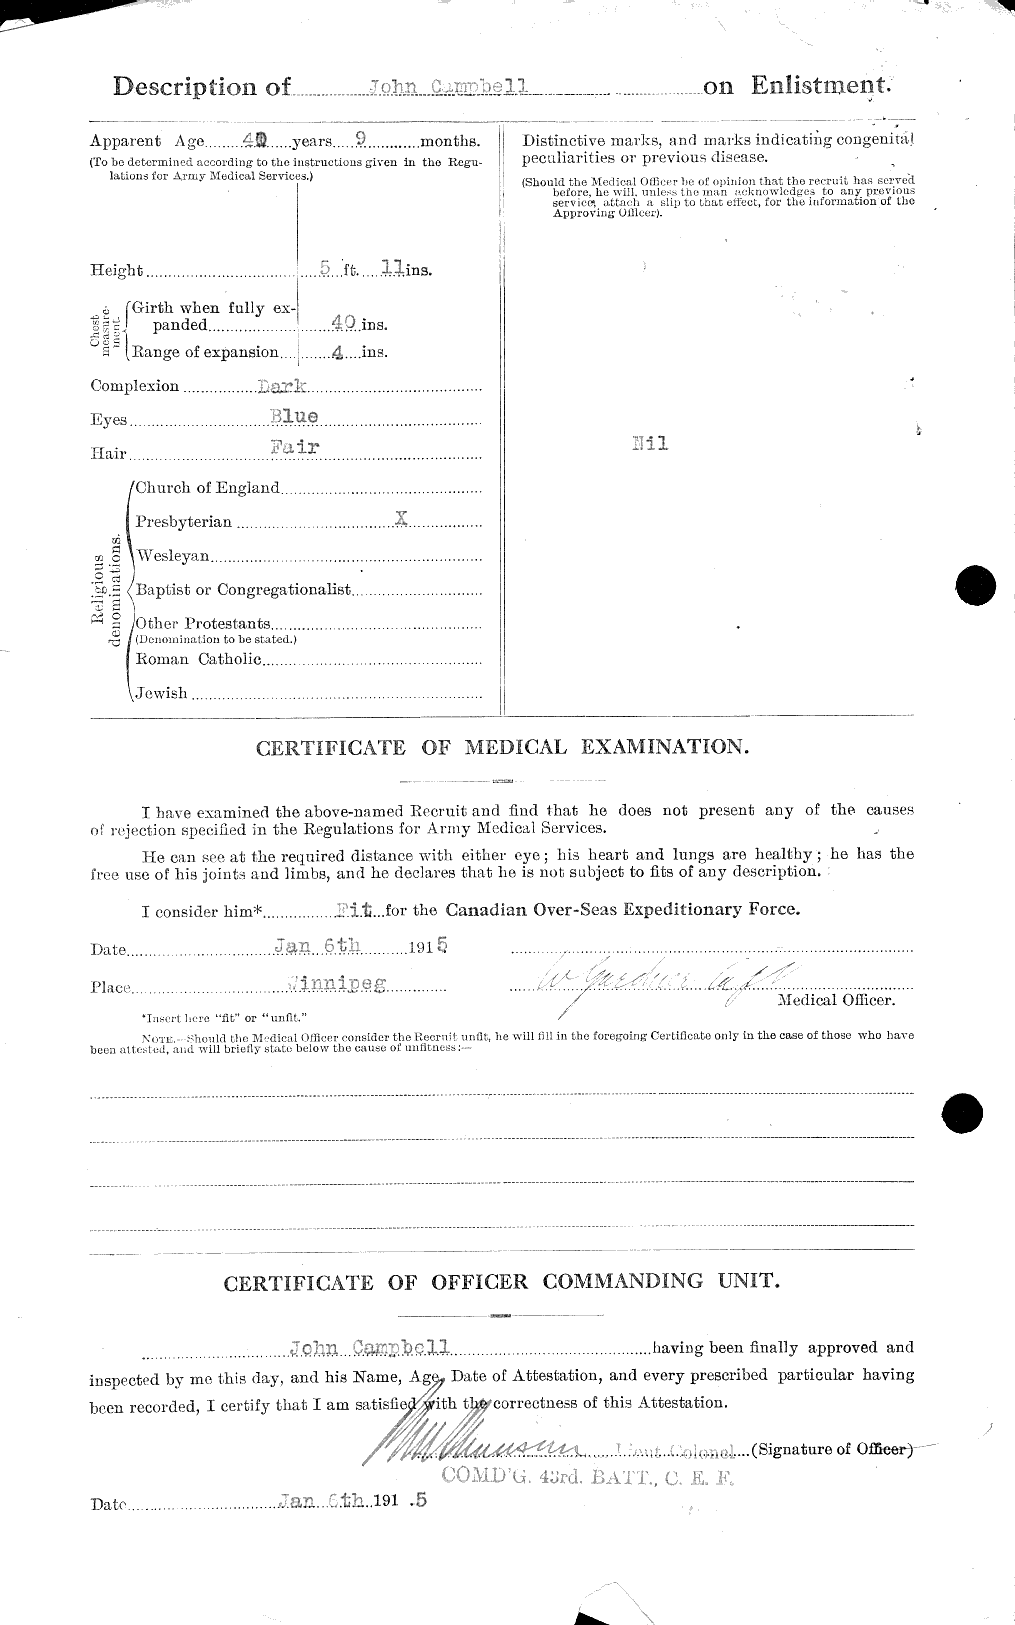 Personnel Records of the First World War - CEF 006829b